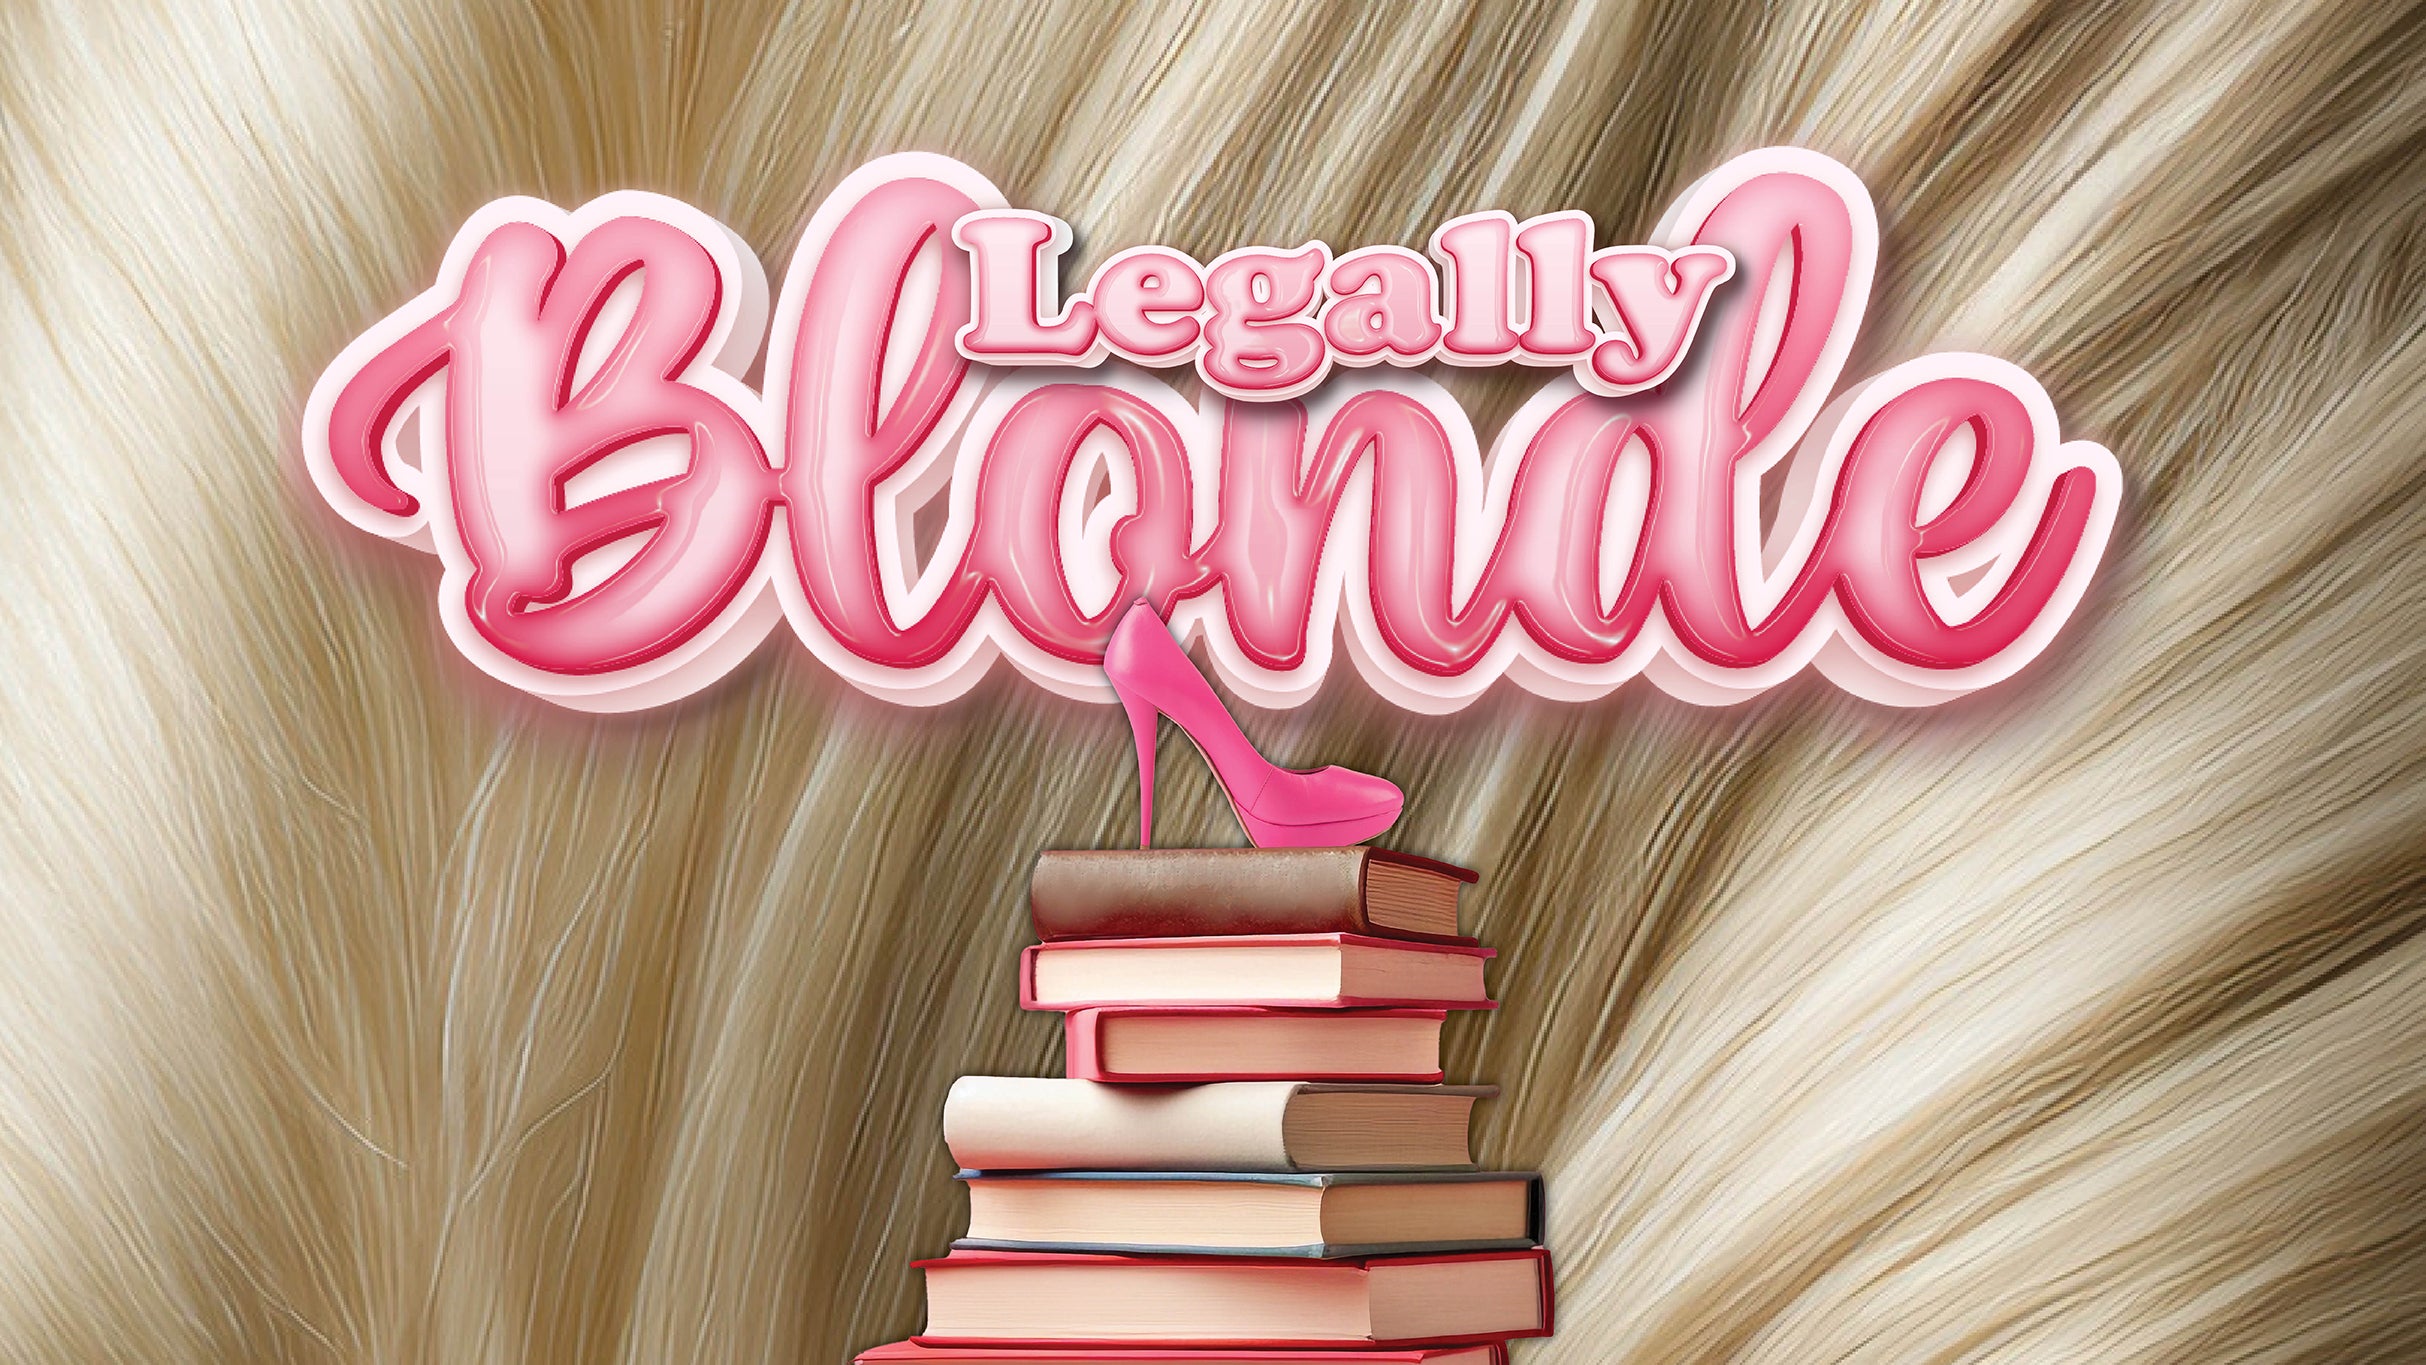 Legally Blonde at The Ramkat